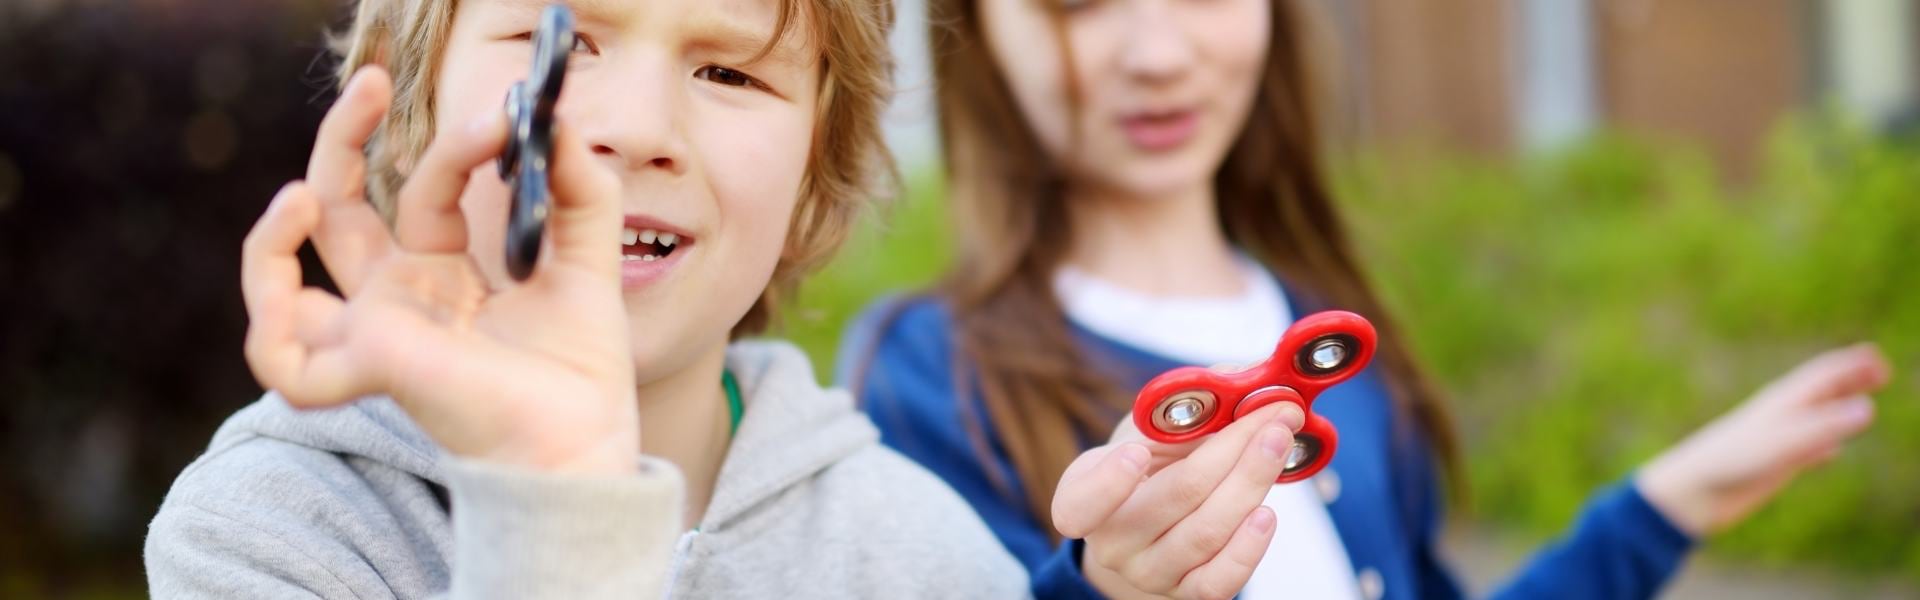 Young boy and girl playing with fidget spinners.